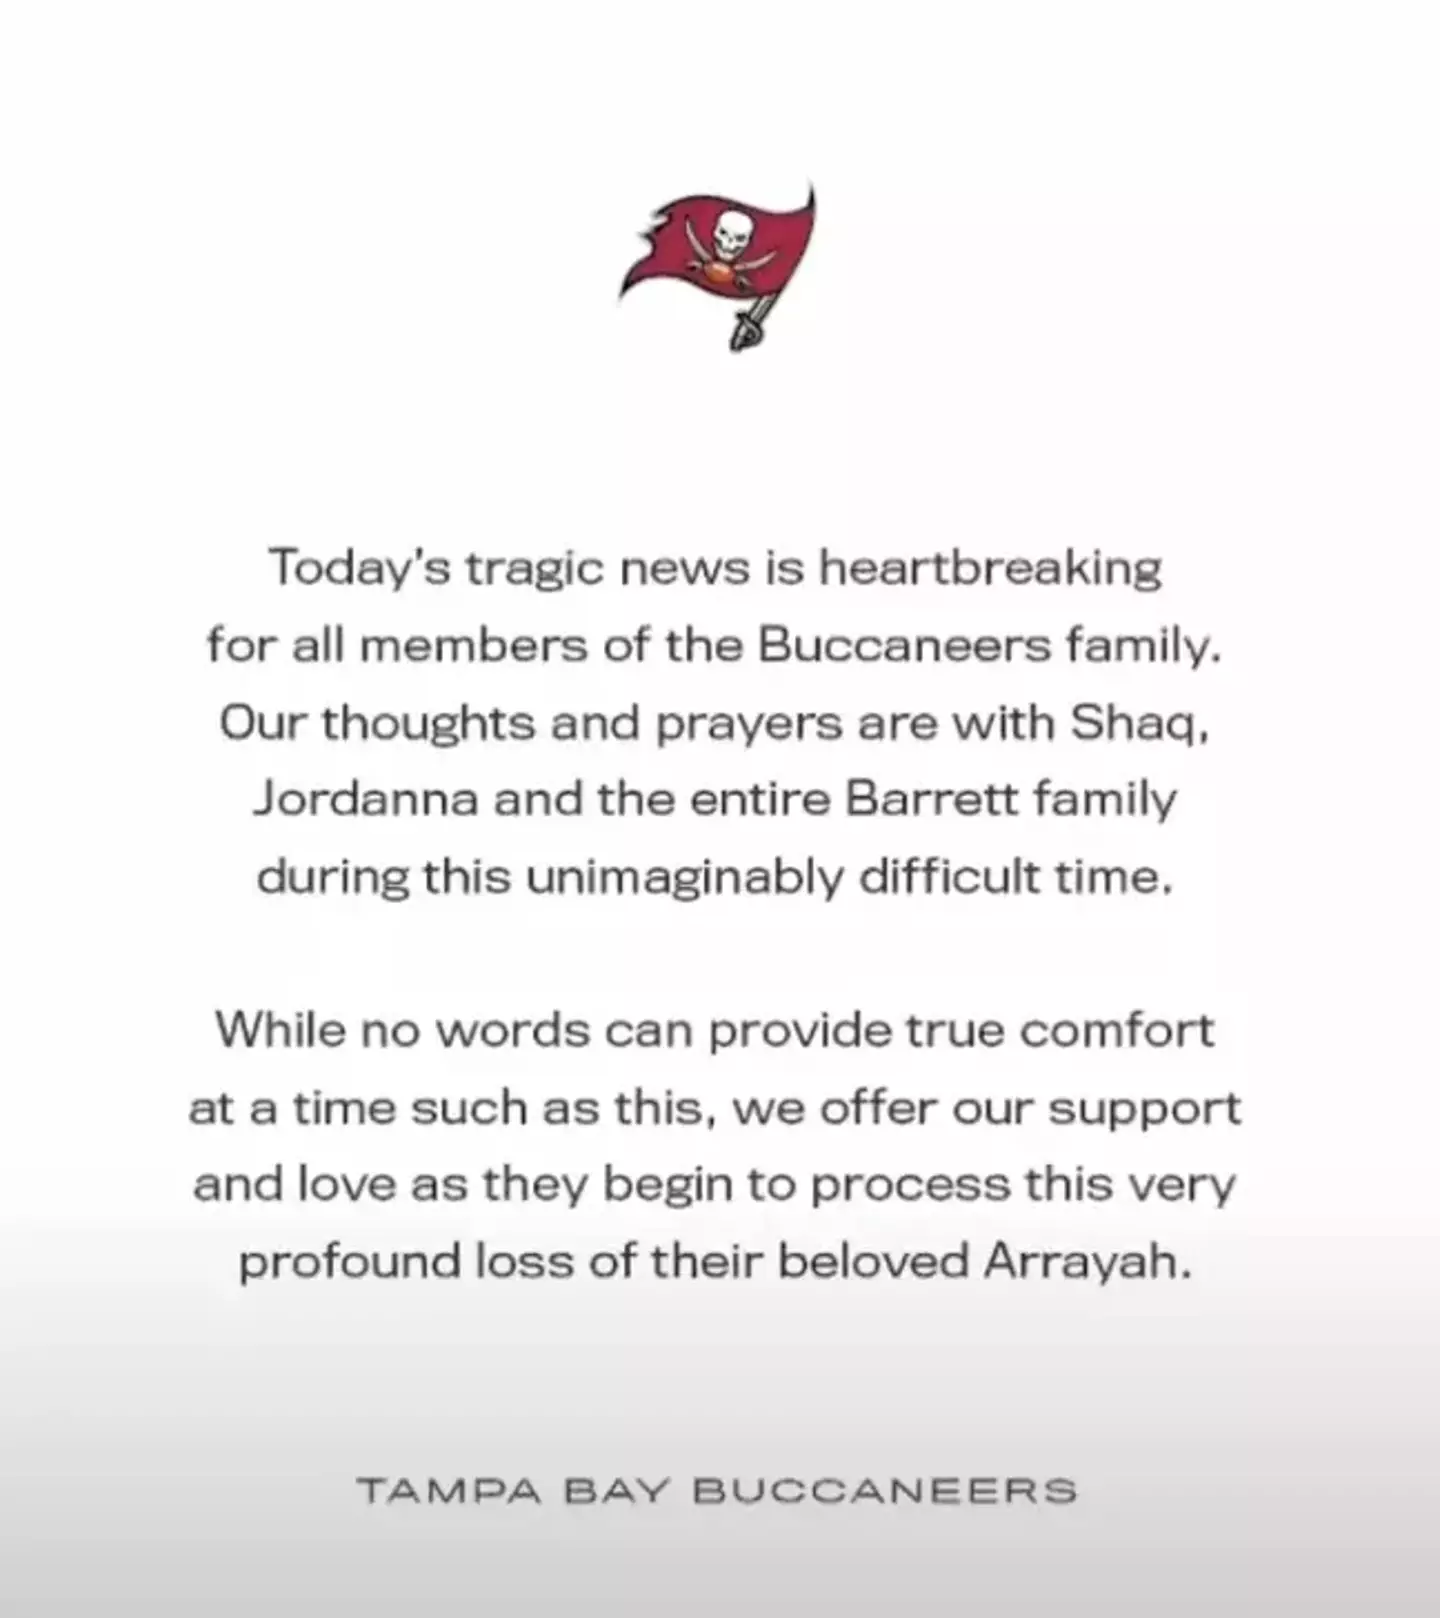 Tampa Bay Buccaneers issued a heartbreaking statement.